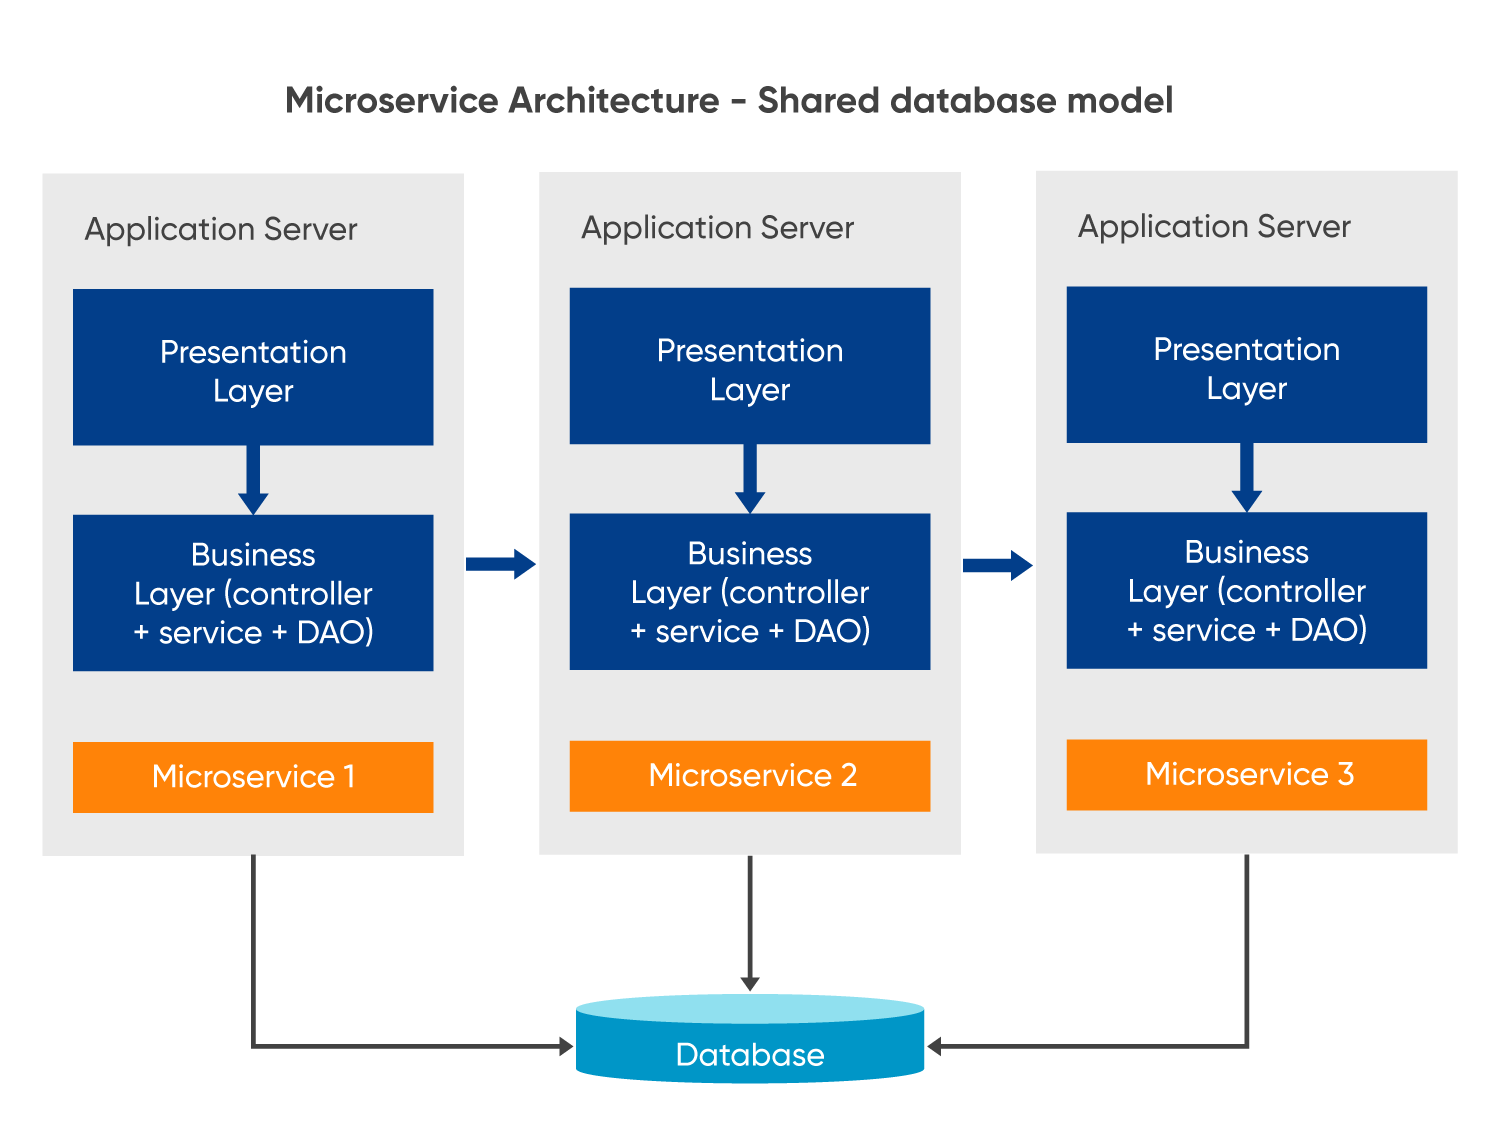 Microservice Architecture - Shared Database Model